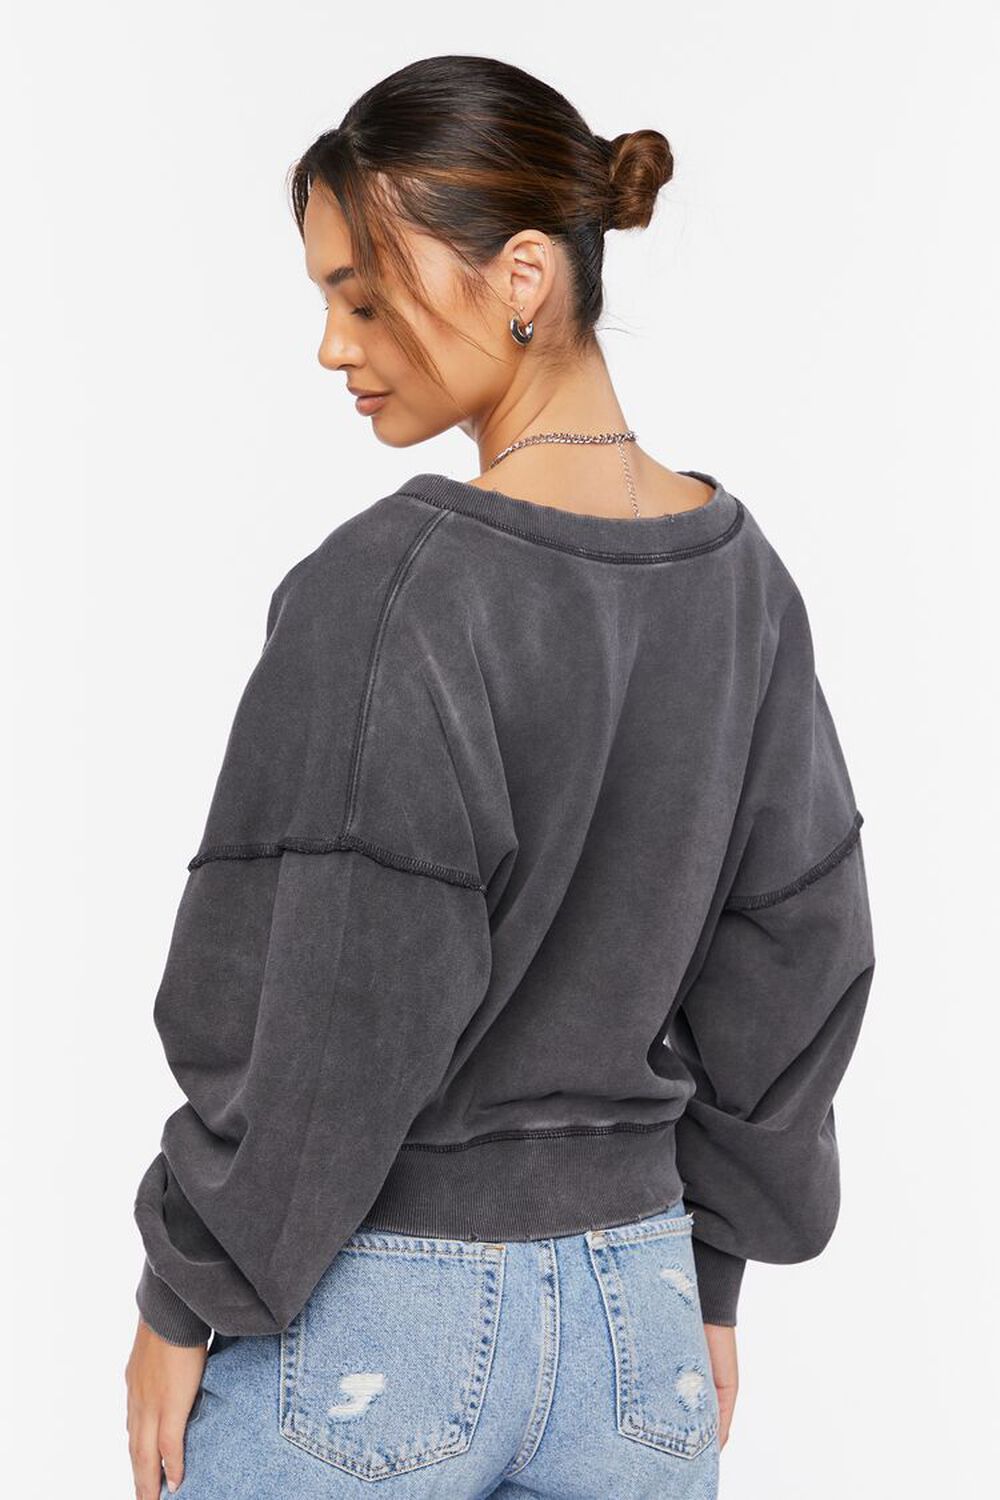 French Terry Mineral Wash Pullover